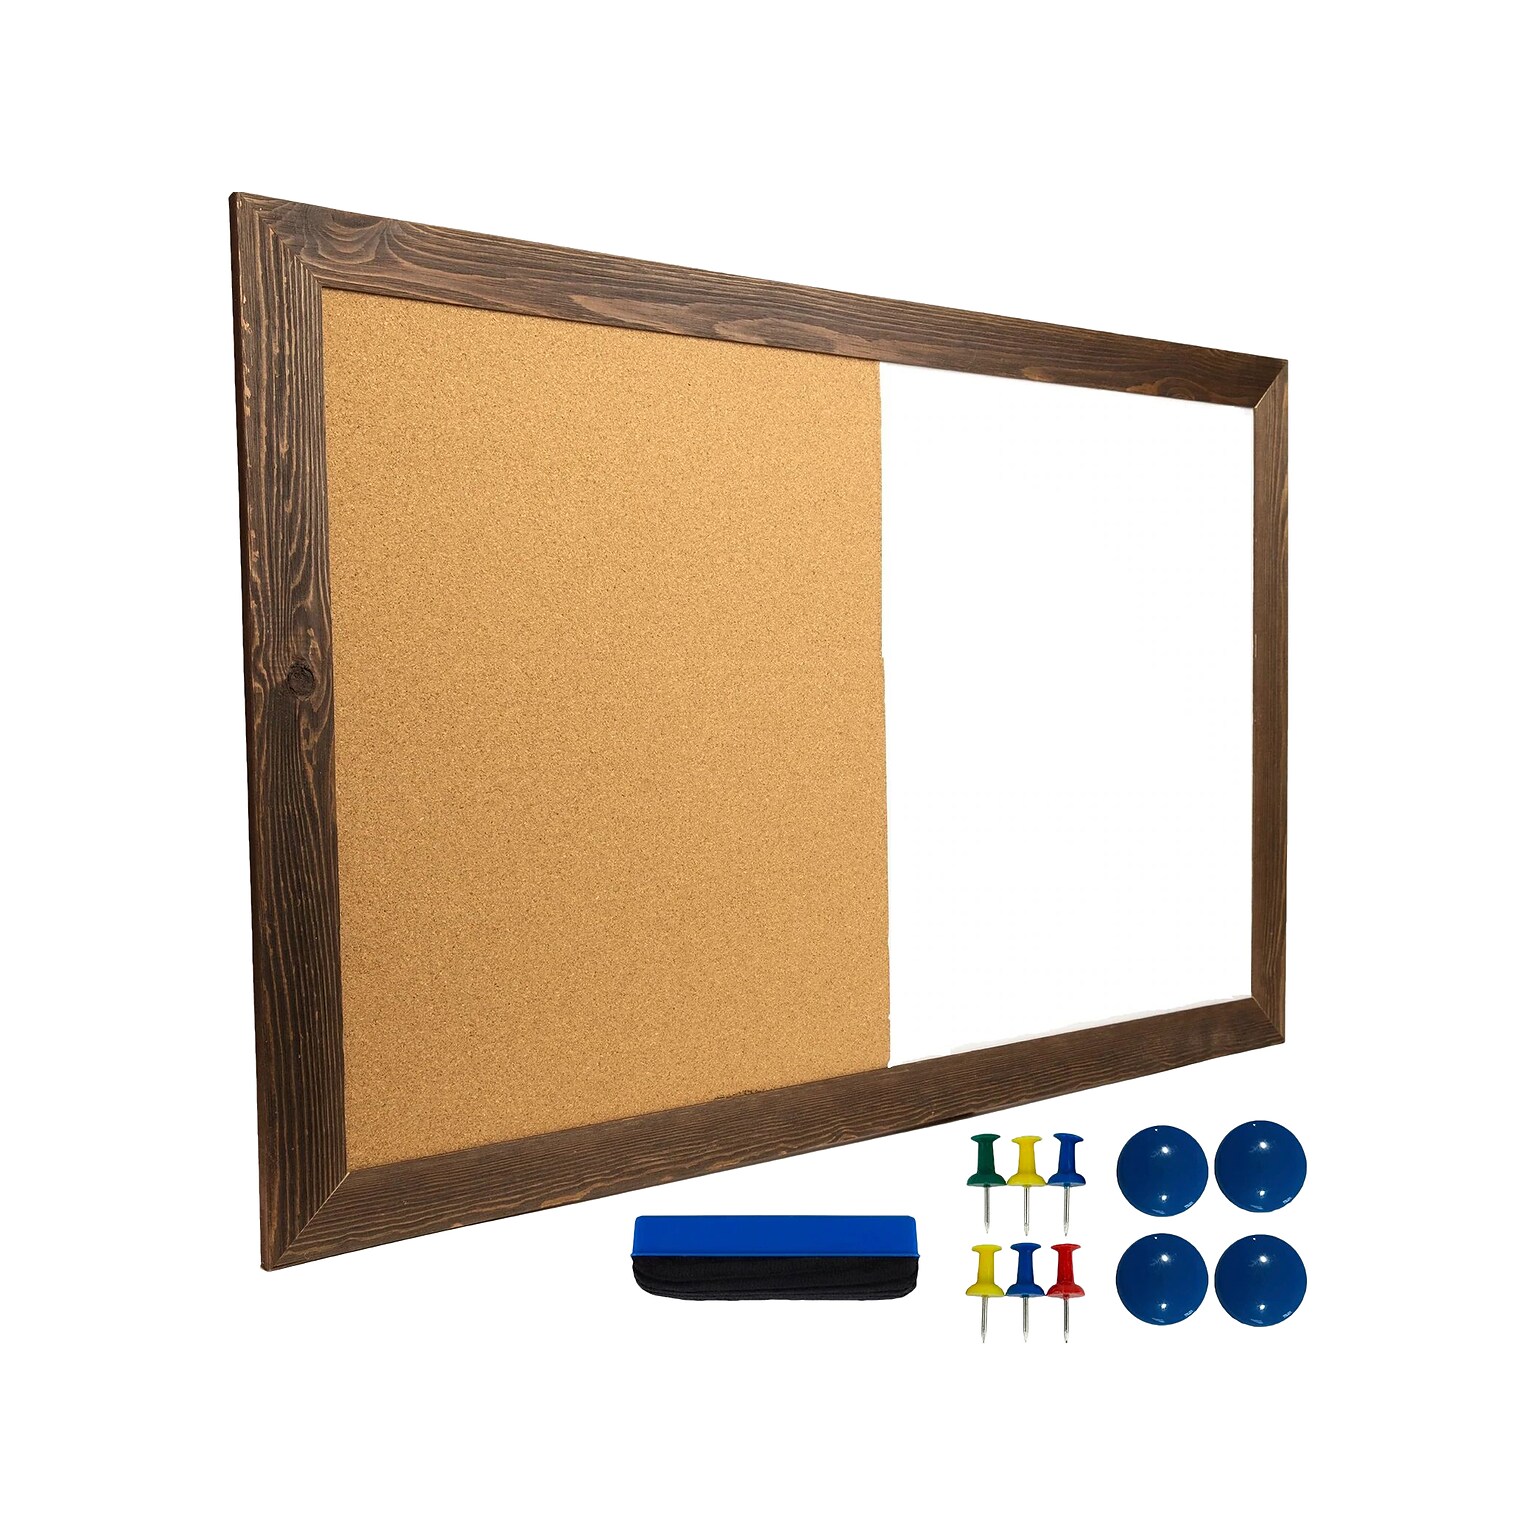 Excello Global Products Combination Dry-Erase Whiteboard, Wood Frame, 3 x 2 (EGP-HD-0078)